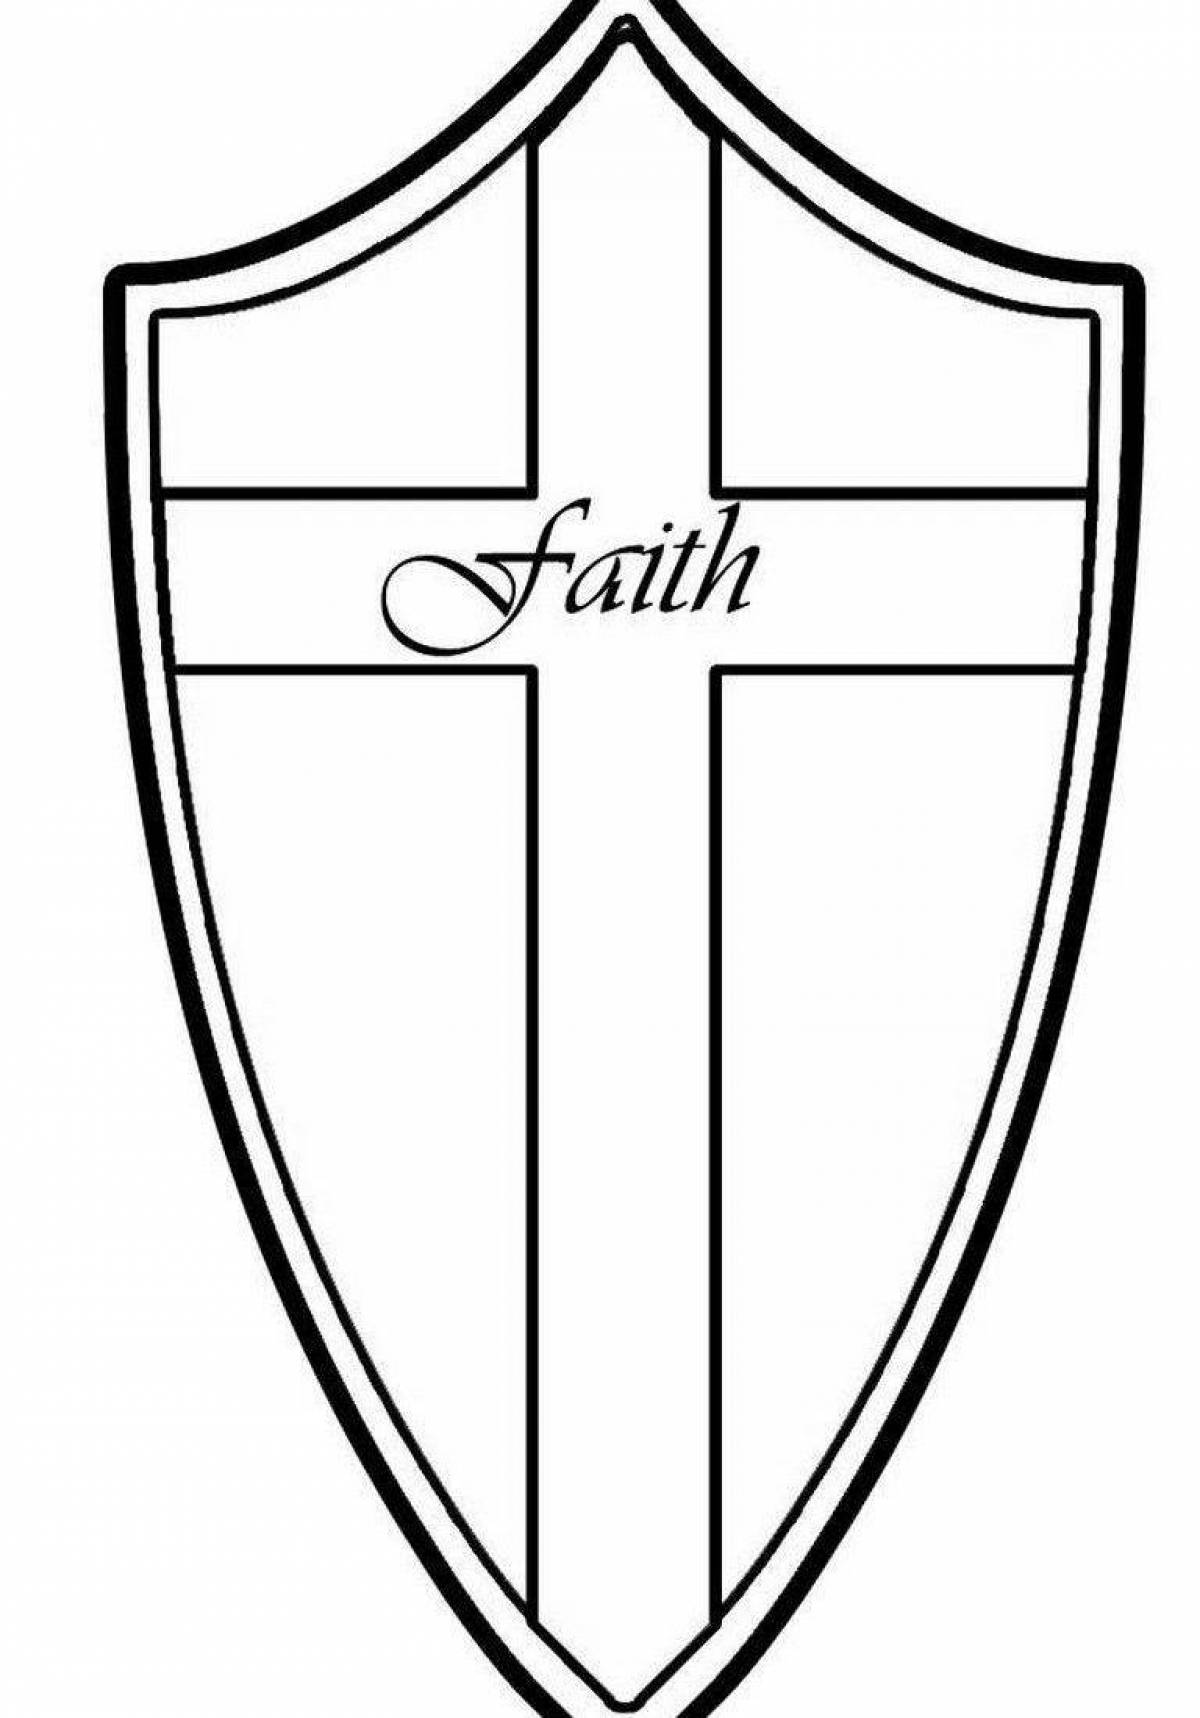 Ornate shield coloring page